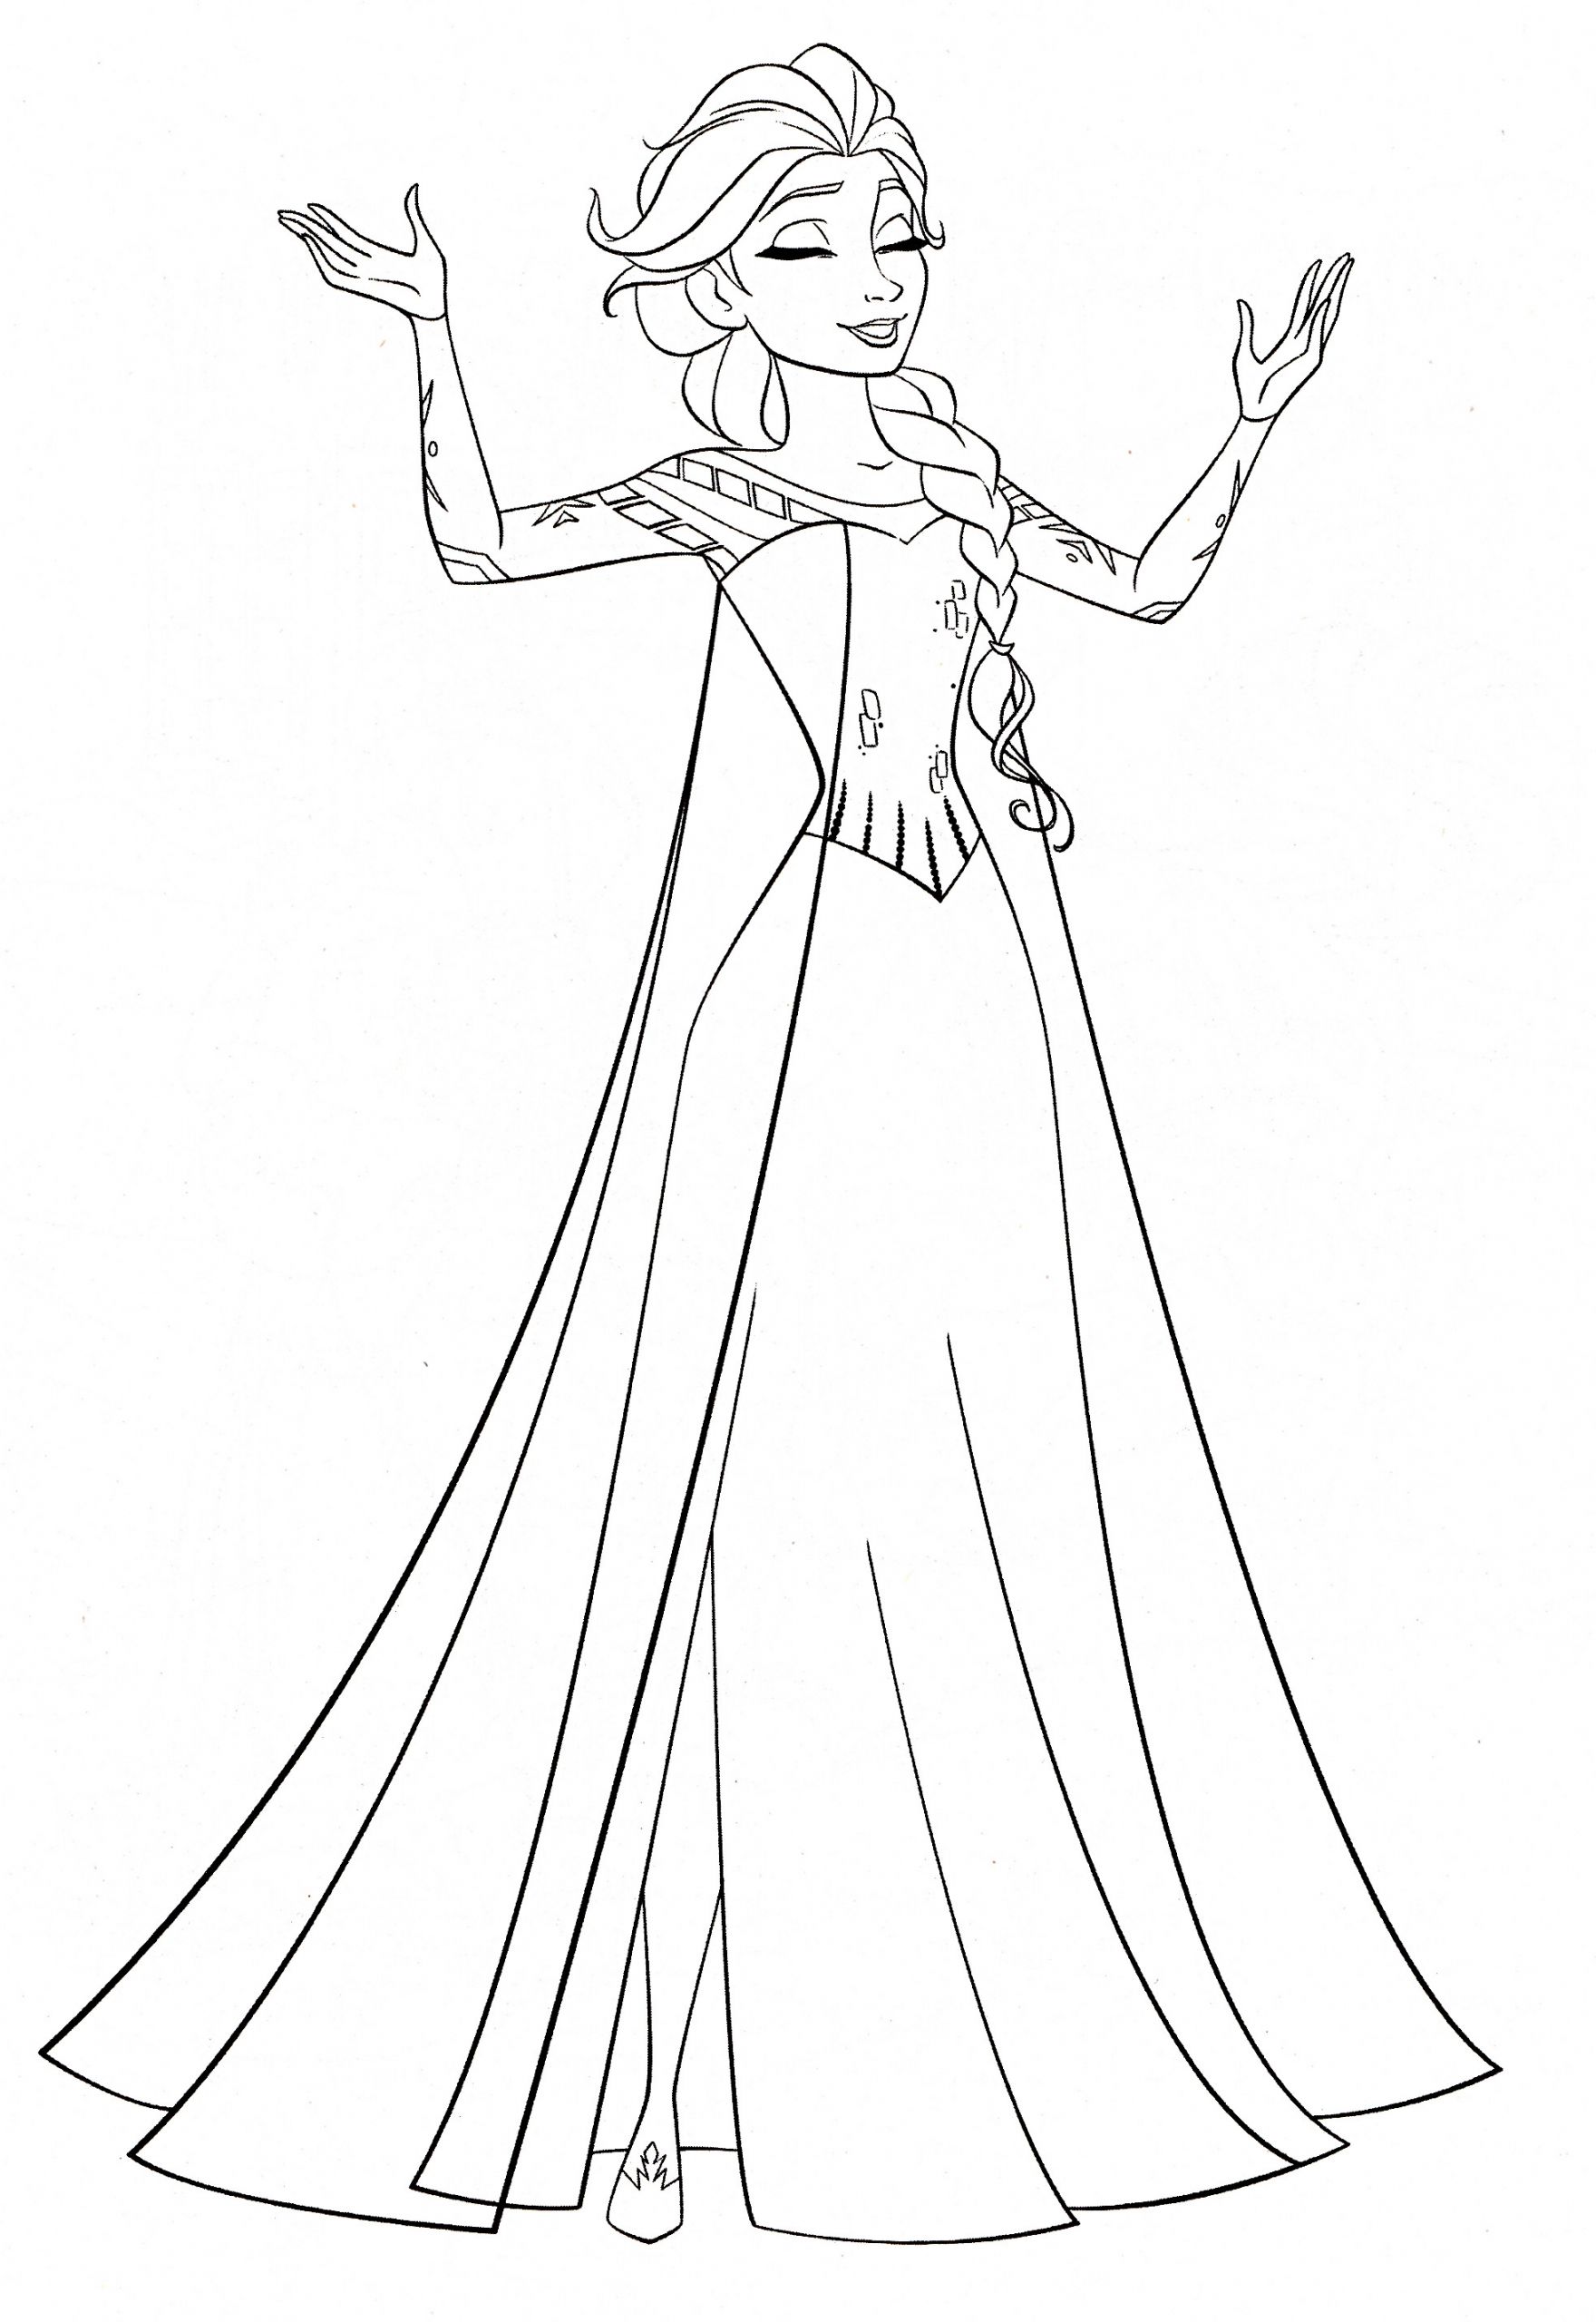 Printable Coloring Pages Frozen
 Disney’s Frozen Colouring Pages